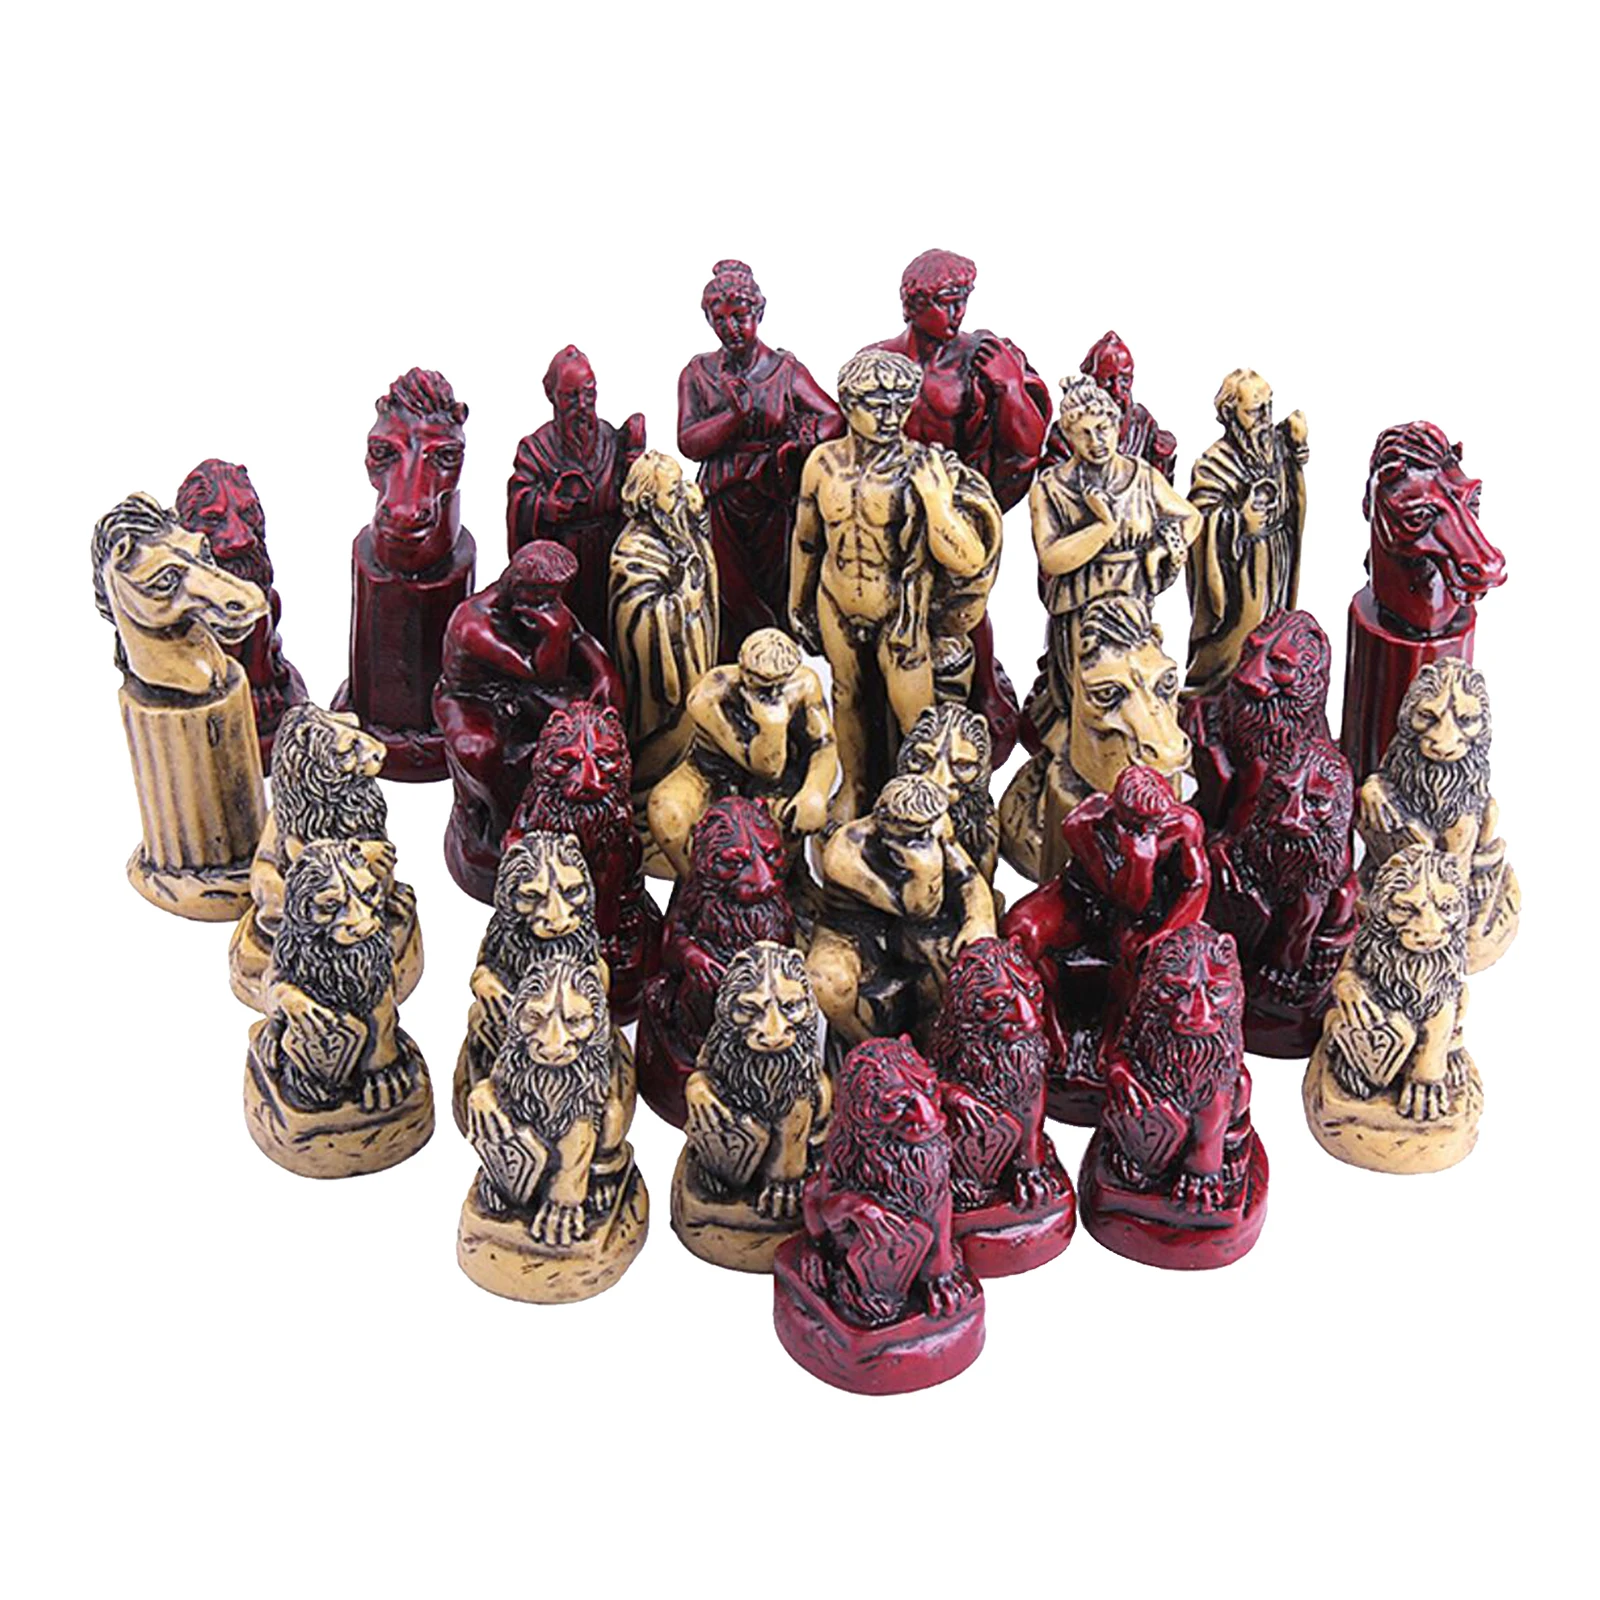 32pcs Chess Pieces, Antique Roman Checkers Chess Set Portable Game for Family, Gift for Kids Adult Friends, Chessmen Set